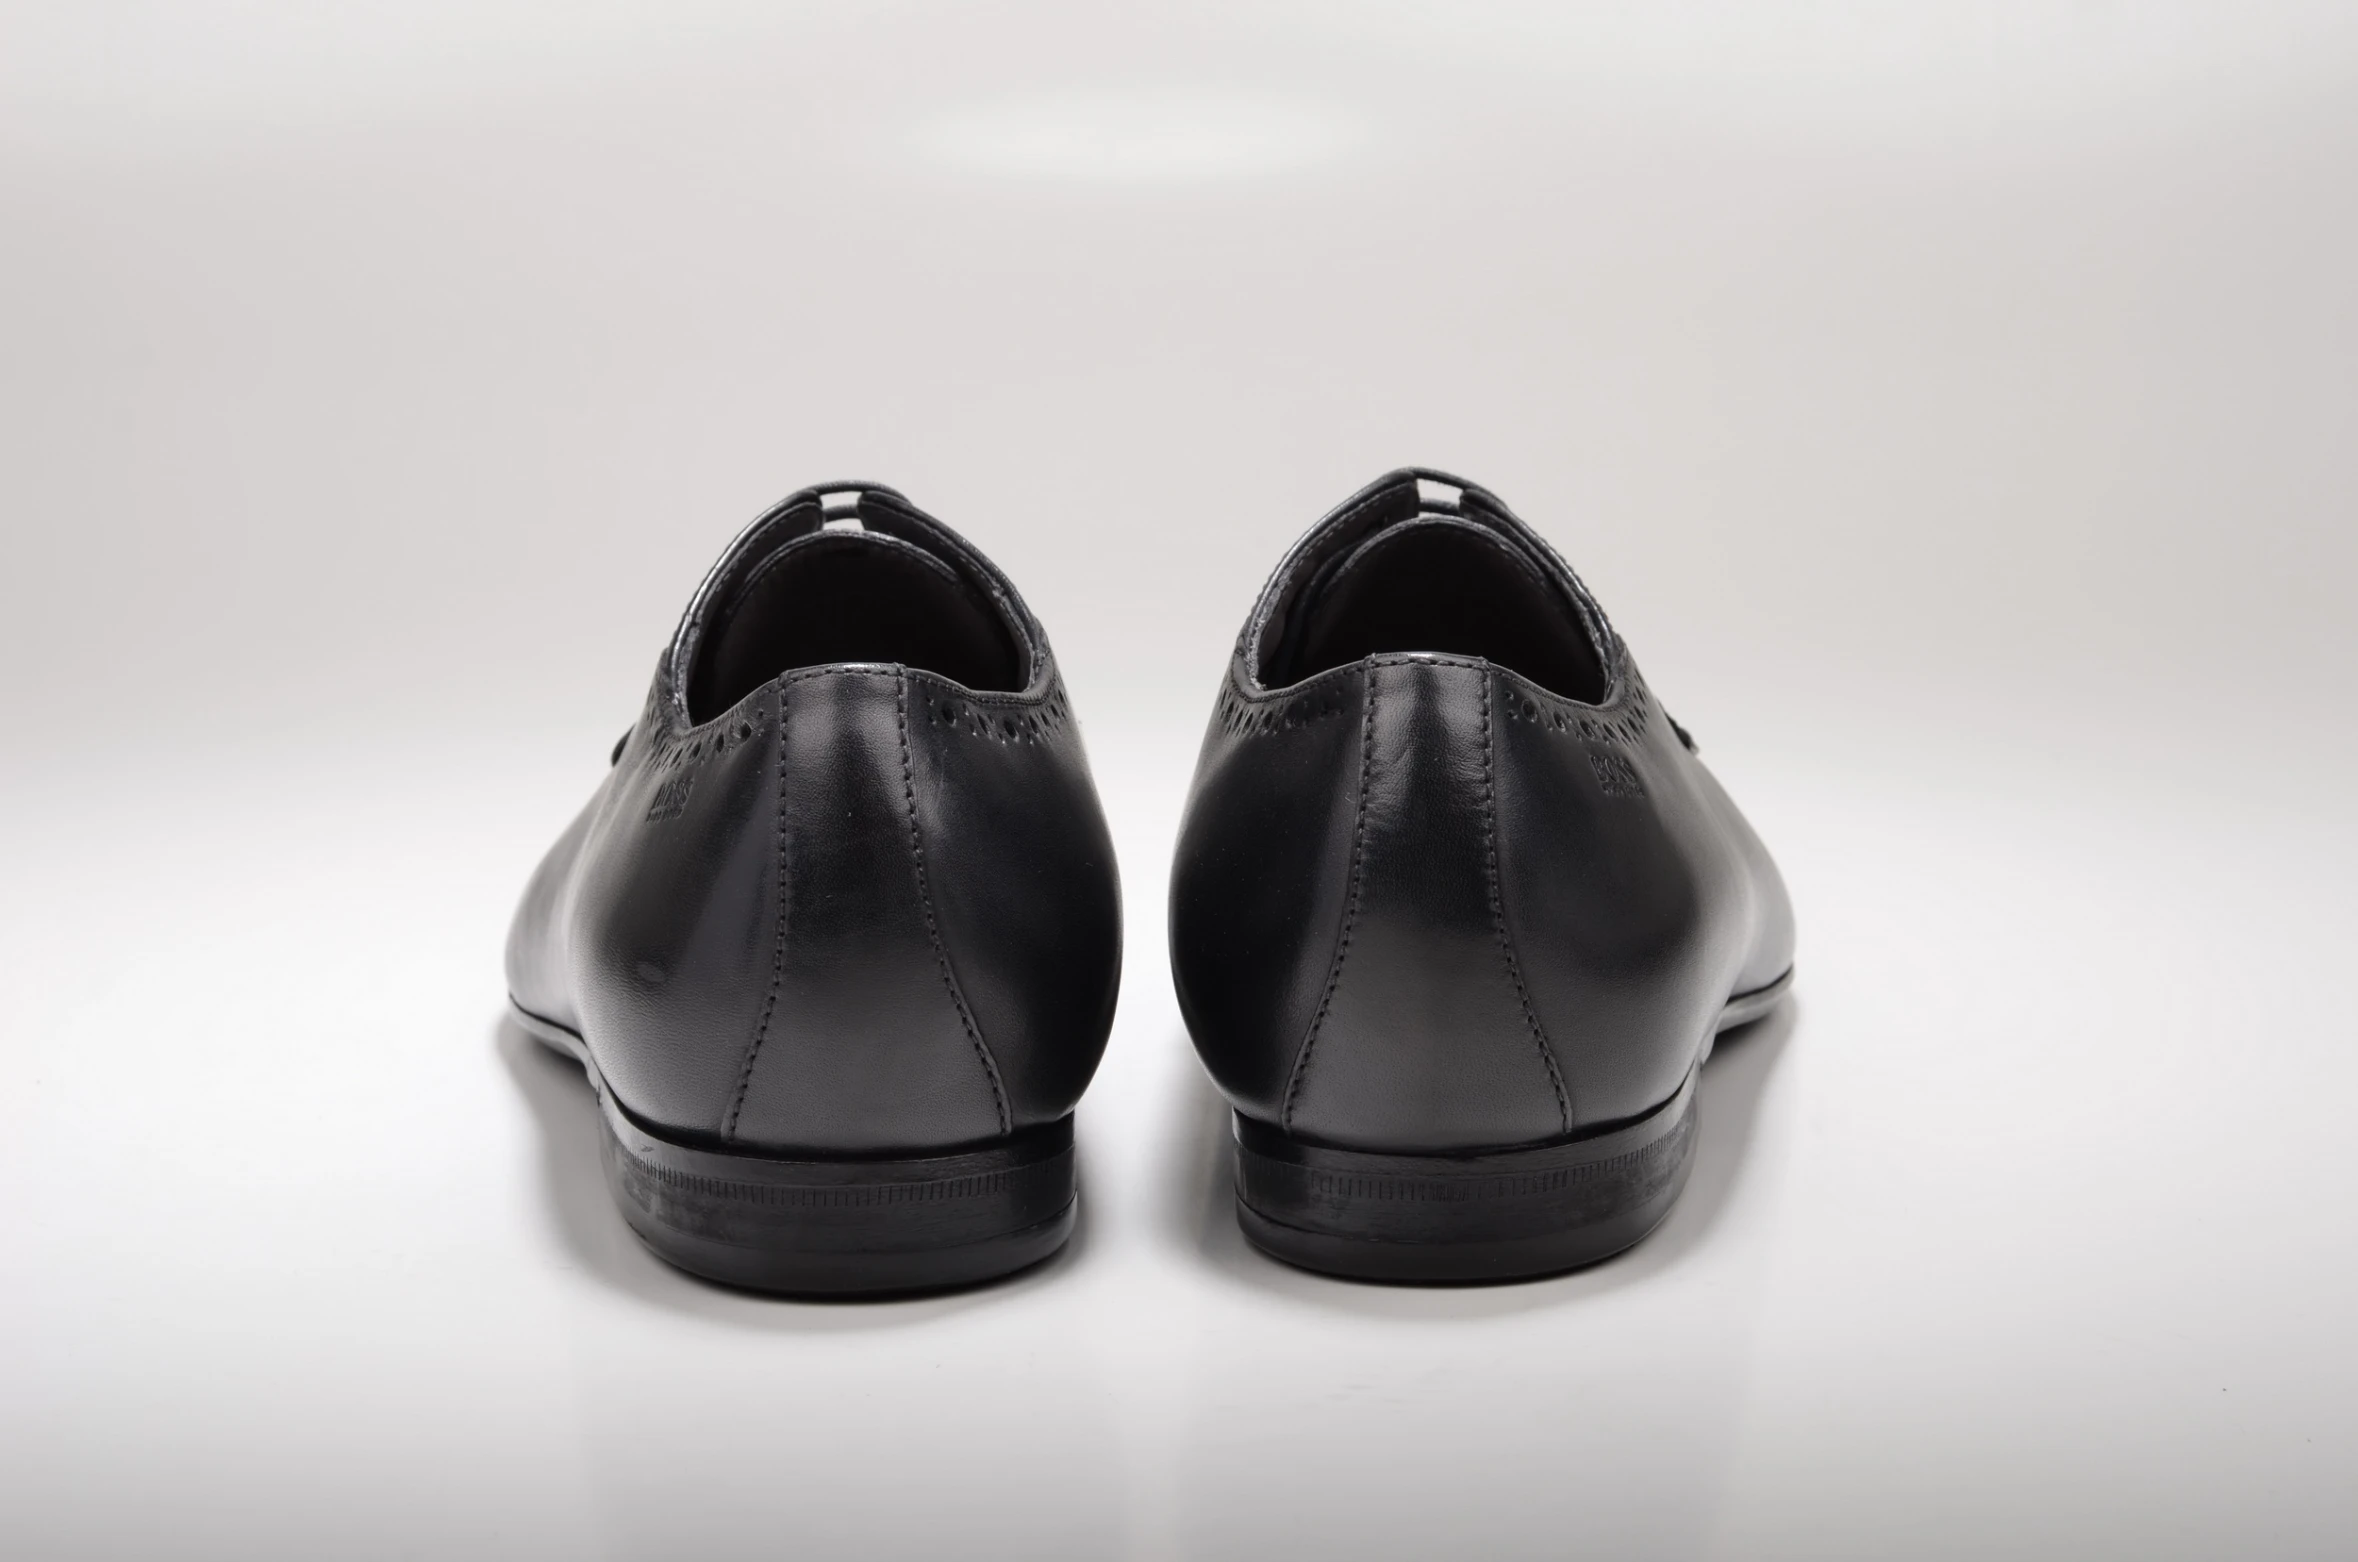 a pair of black men's shoes that are sitting on a white background